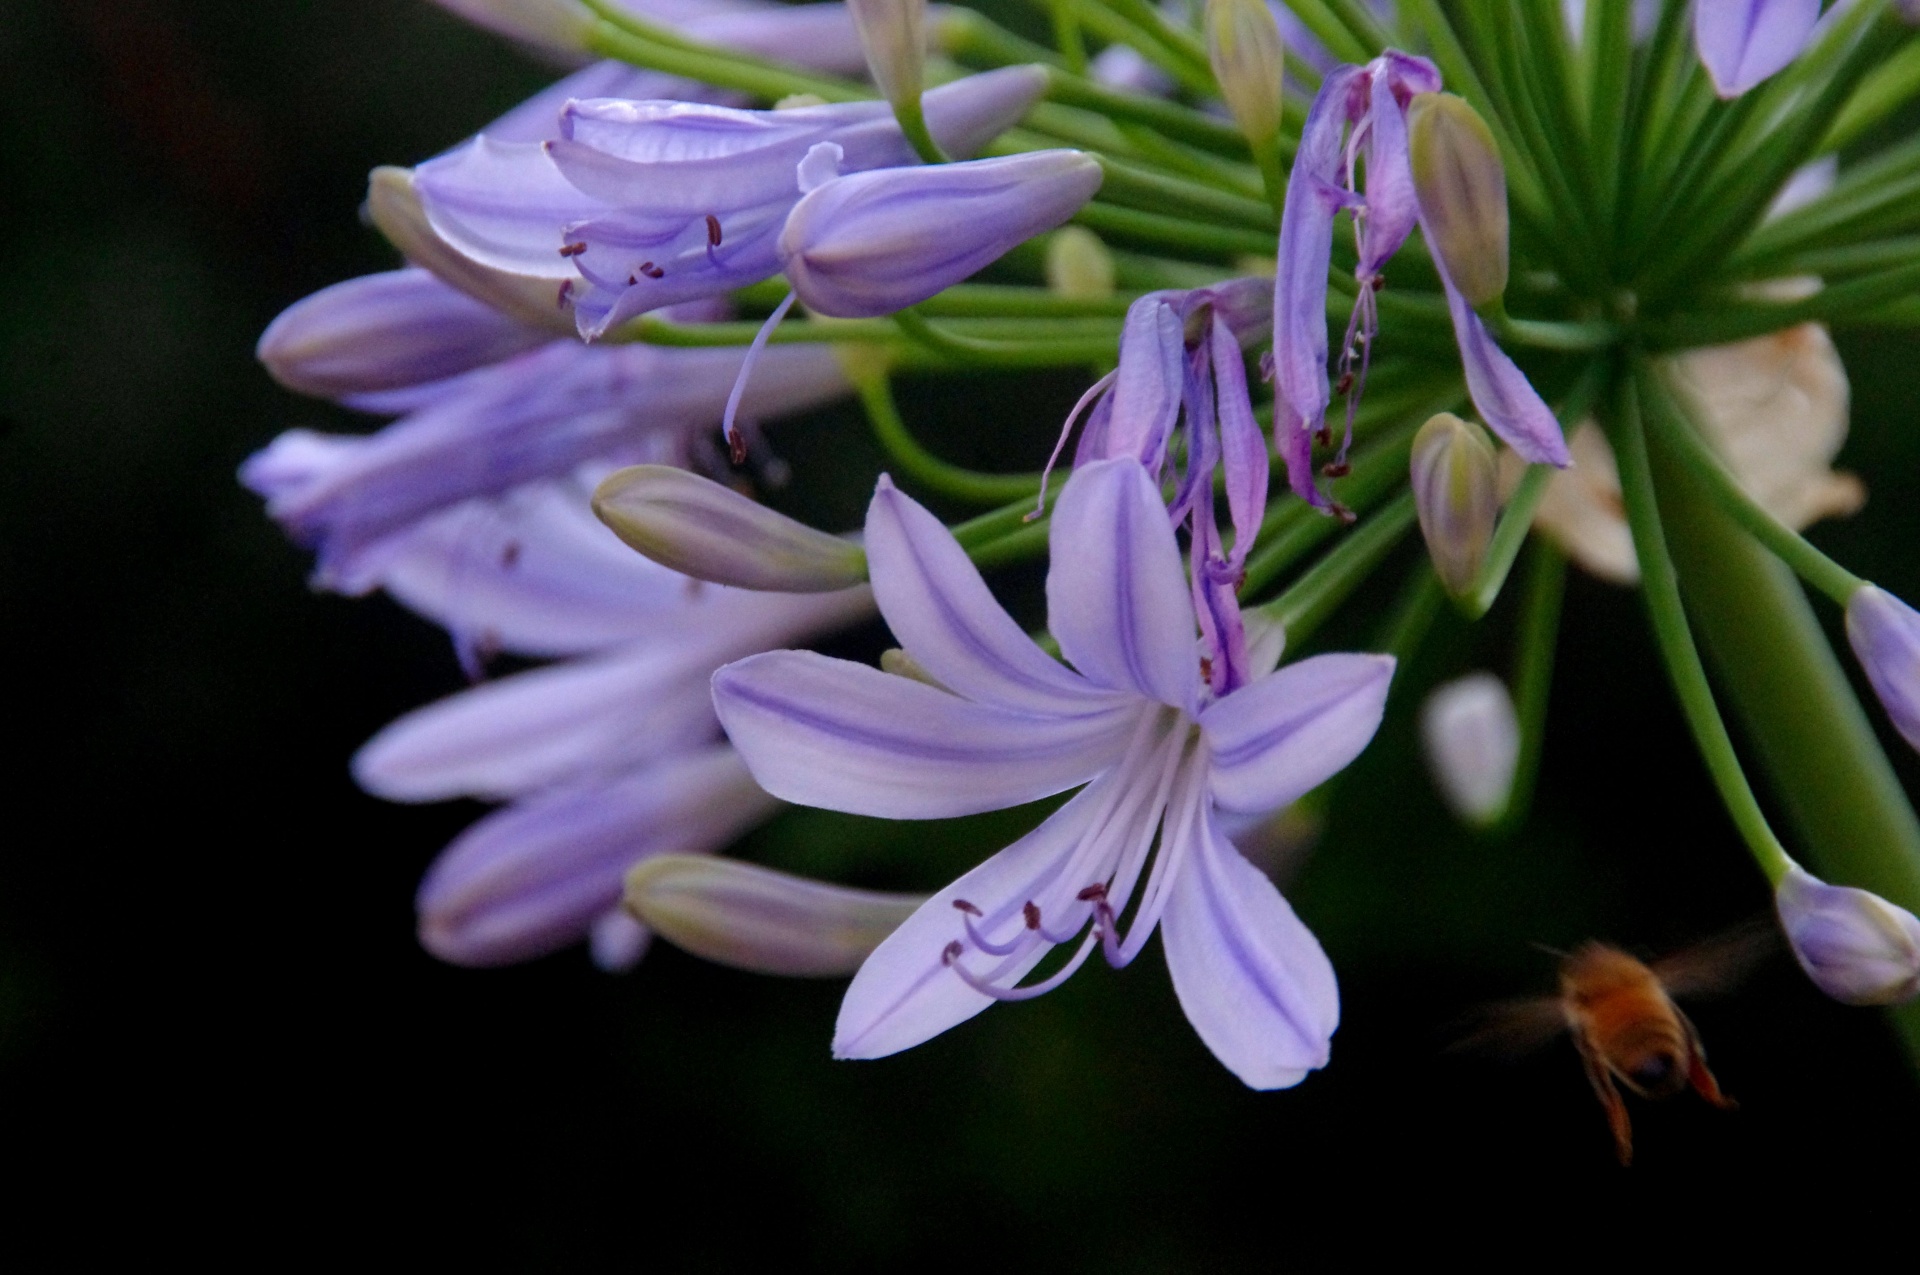 Agapanthus With Approaching Bee